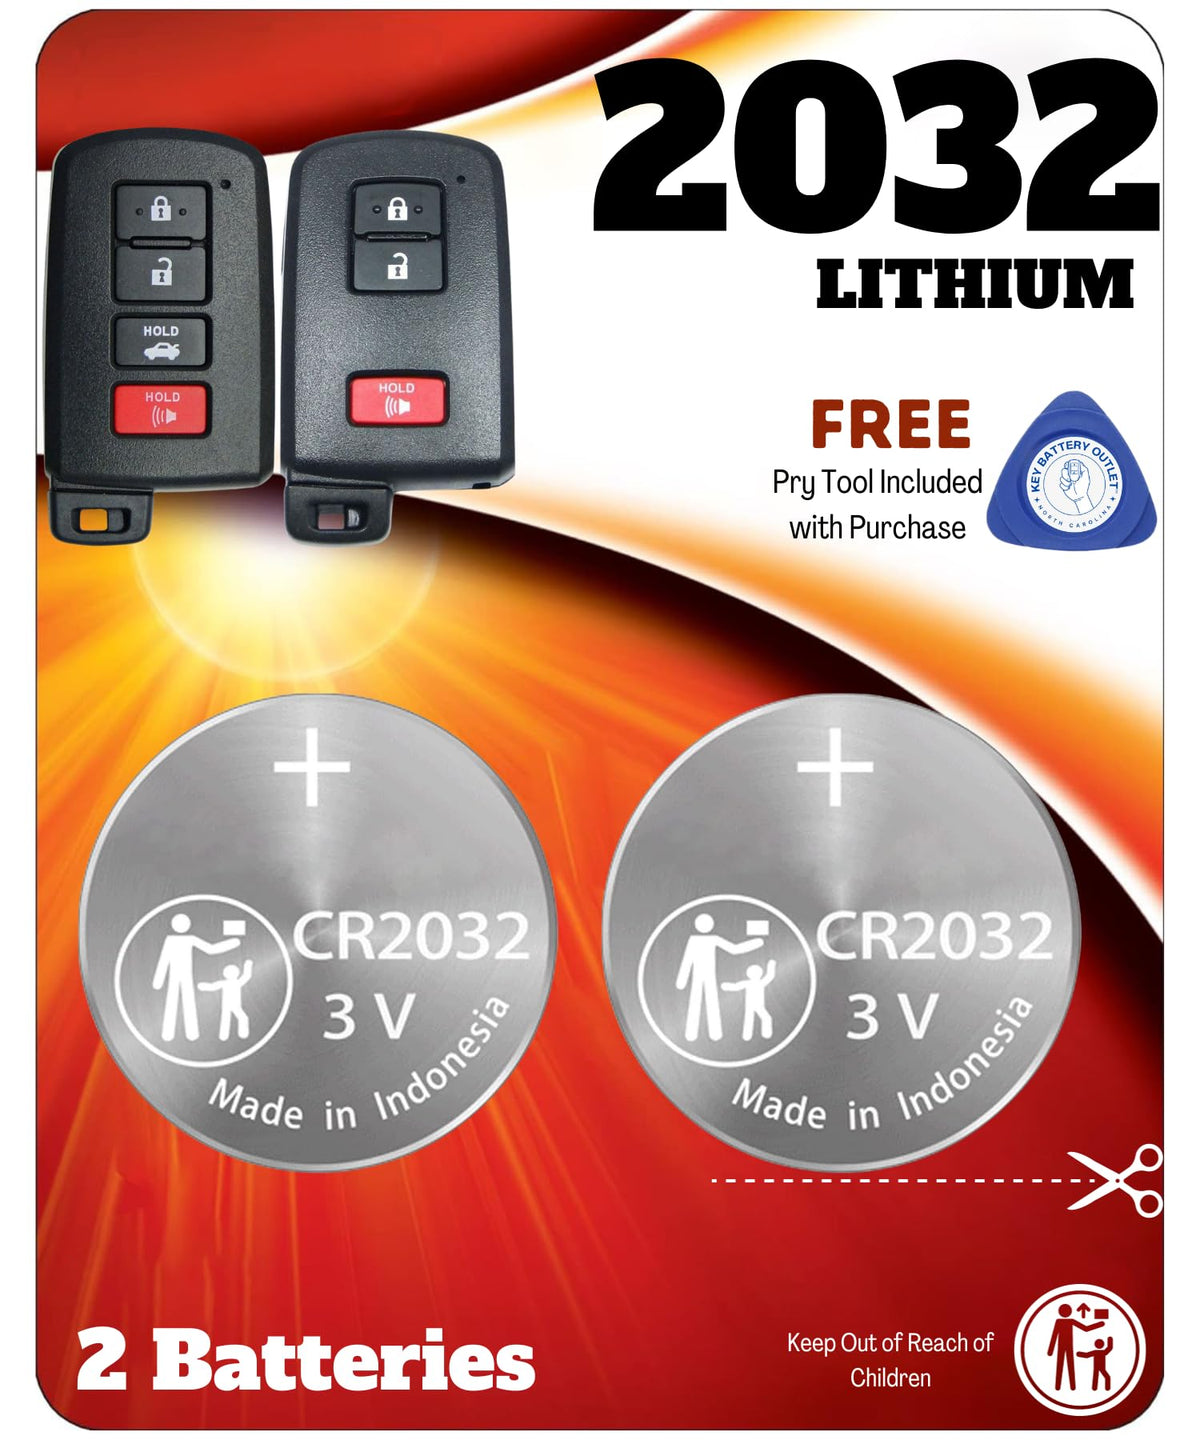 (2 Pack) CR2032 OEM Remote Key Fob Battery 2032 Replacement for Toyota Camry Corolla Highlander 4Runner Avalon Prius C Sequoia Tacoma Tundra Smart Key (HYQ14FBA, HYQ14FBB) Check Fitment Guide